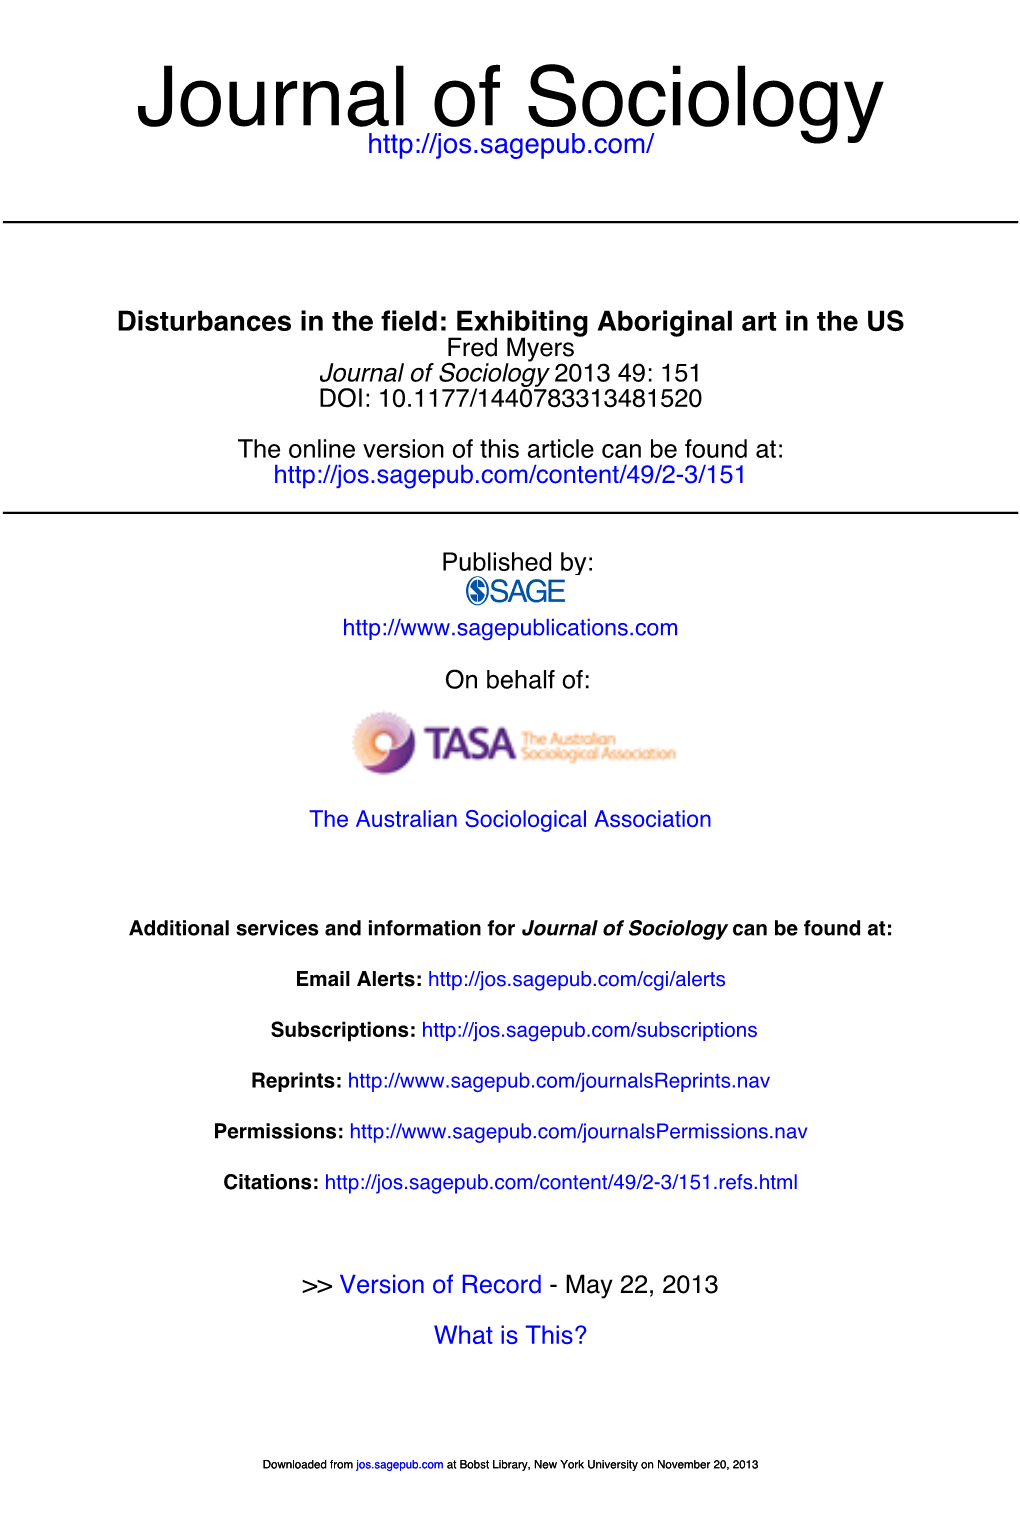 Disturbances in the Field: Exhibiting Aboriginal Art in the US Fred Myers Journal of Sociology 2013 49: 151 DOI: 10.1177/1440783313481520